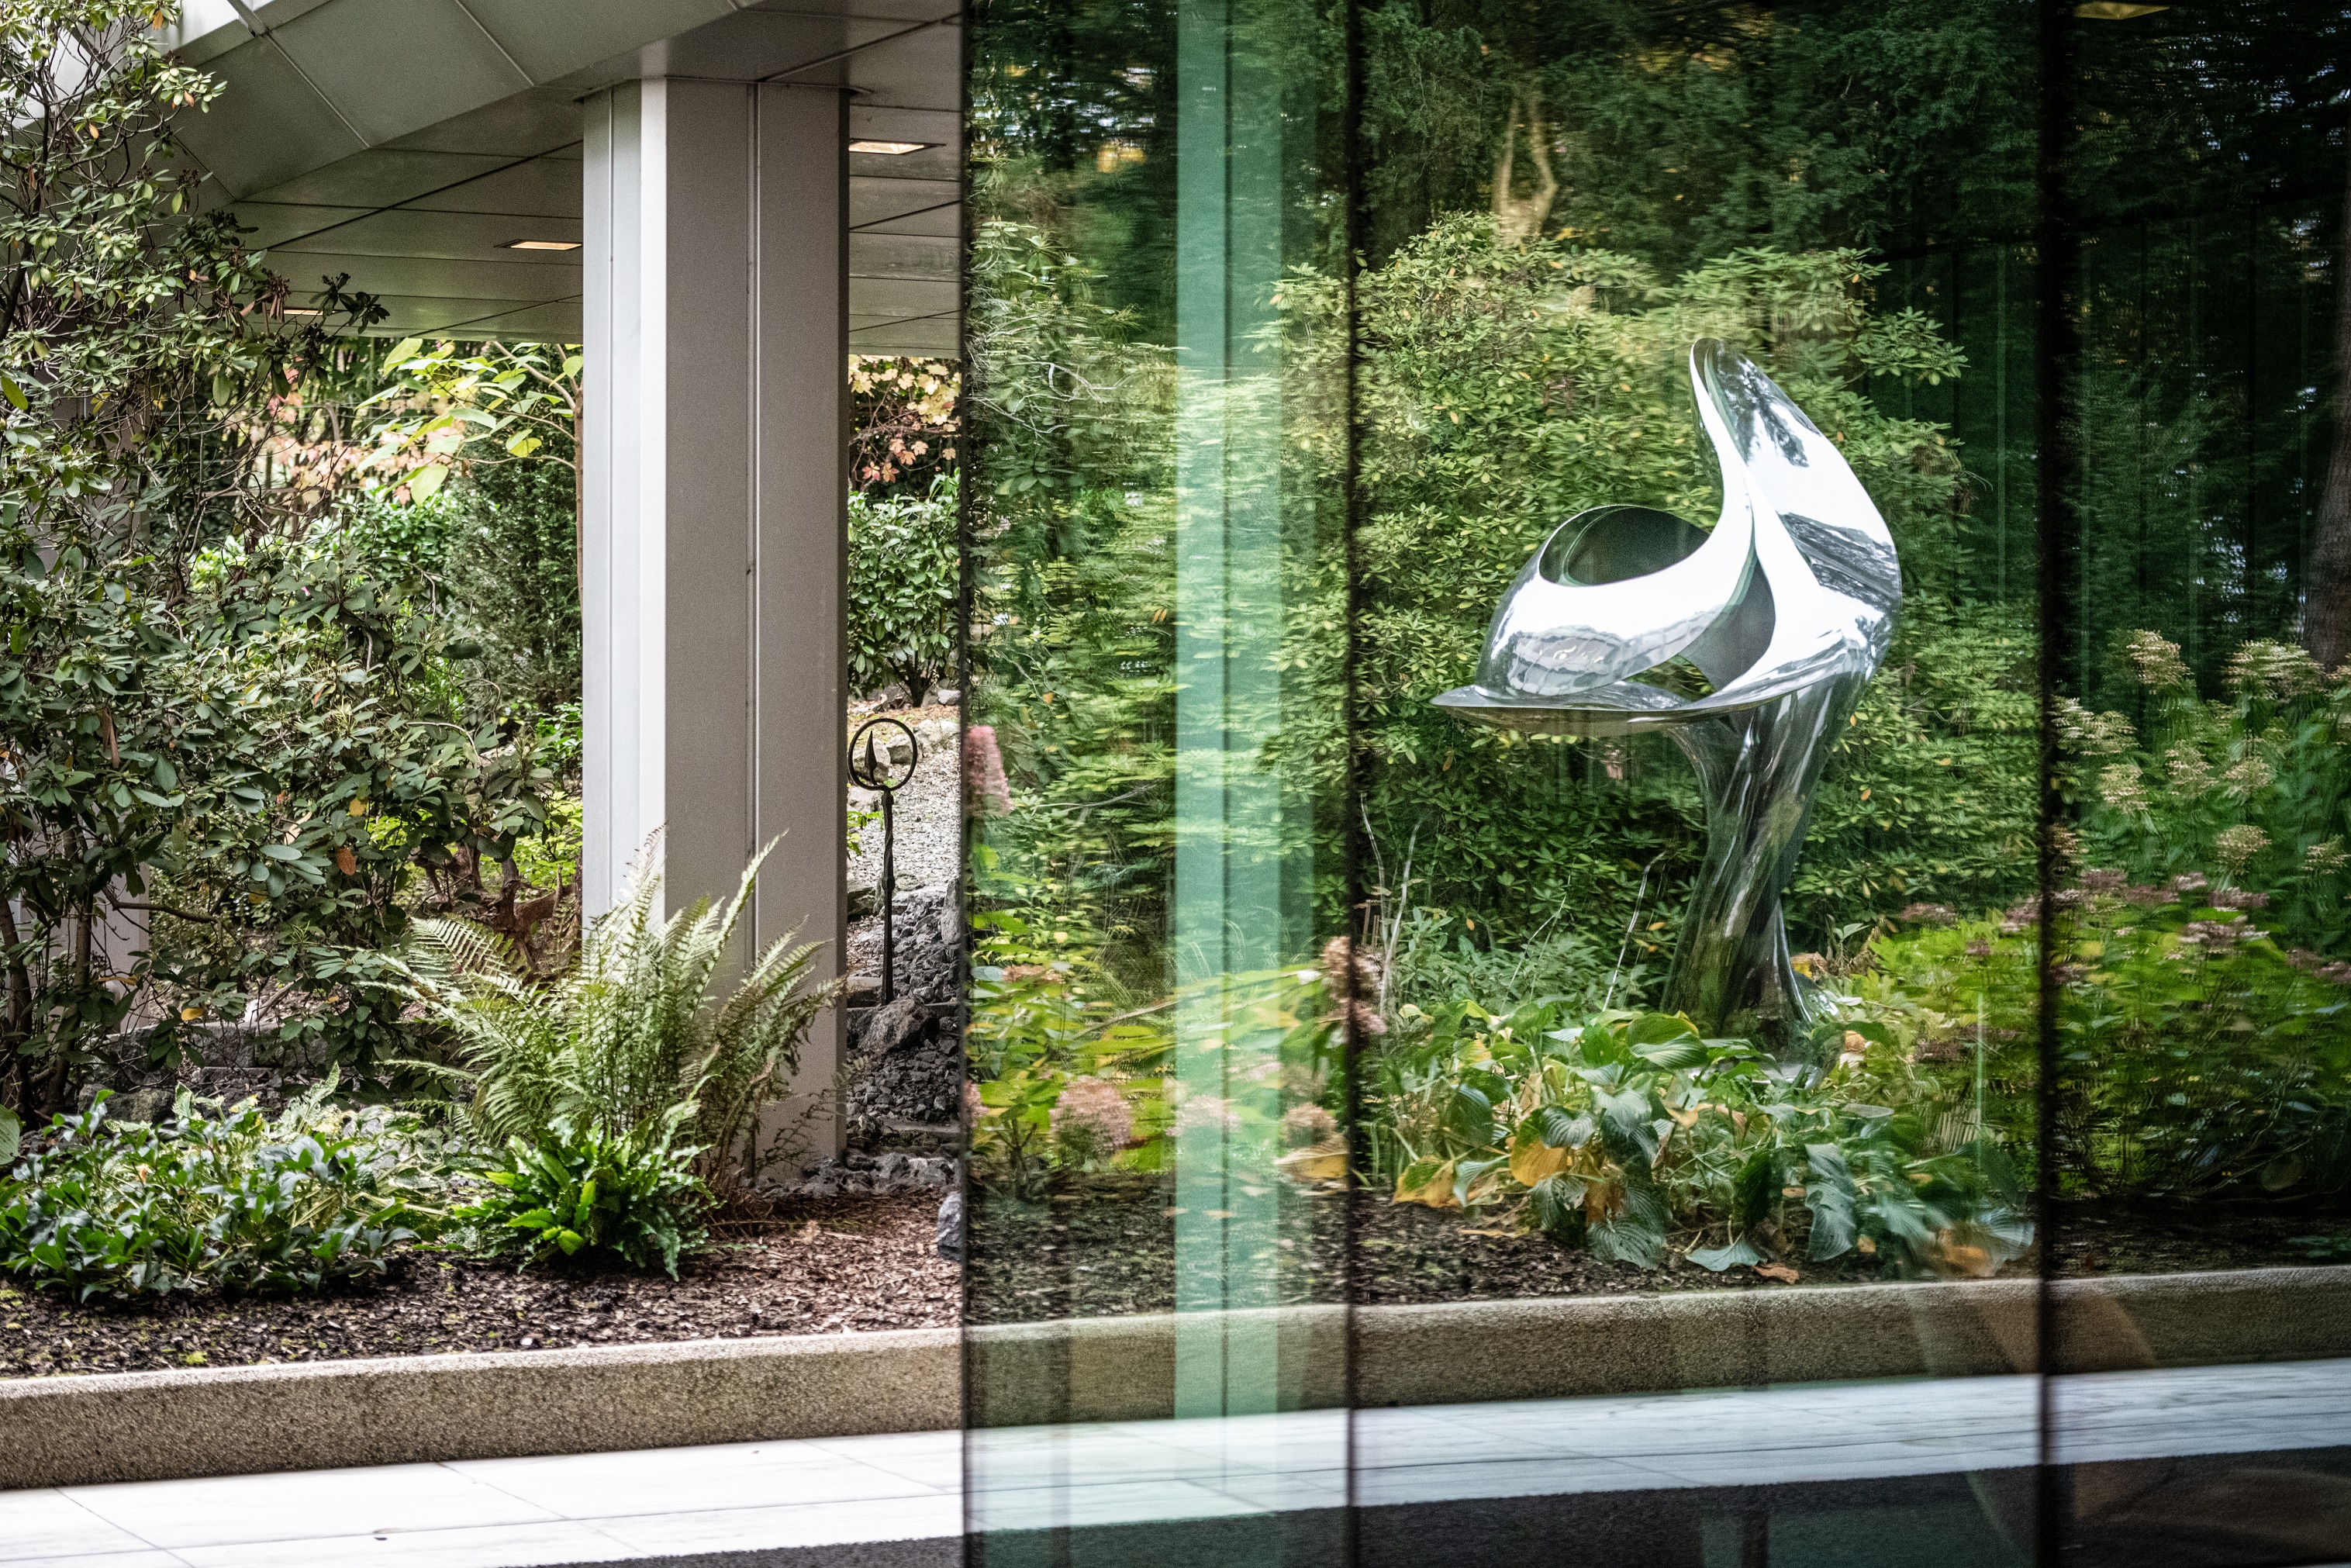 Courtyard of Rothschild & Co's Zurich office, with green plants and a metal sculpture